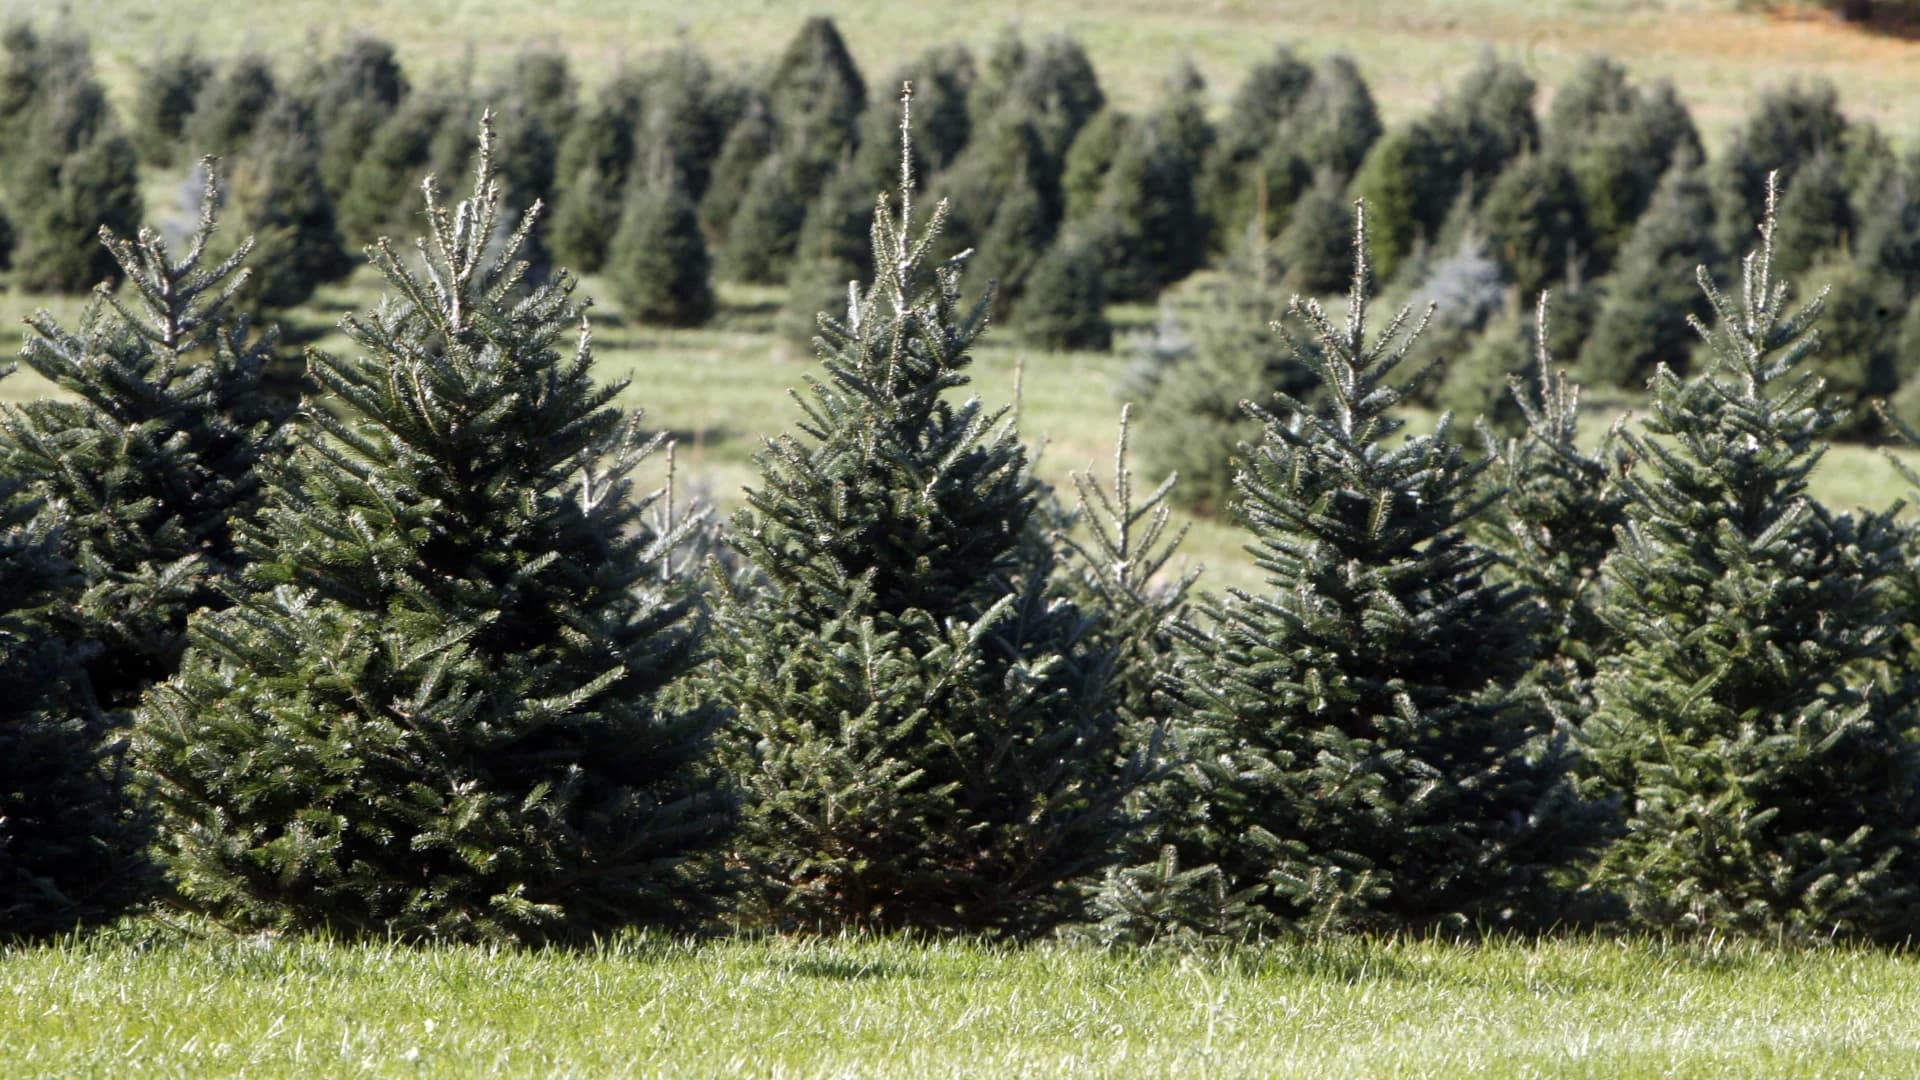 Guide: Christmas Tree Farms in the Hudson Valley